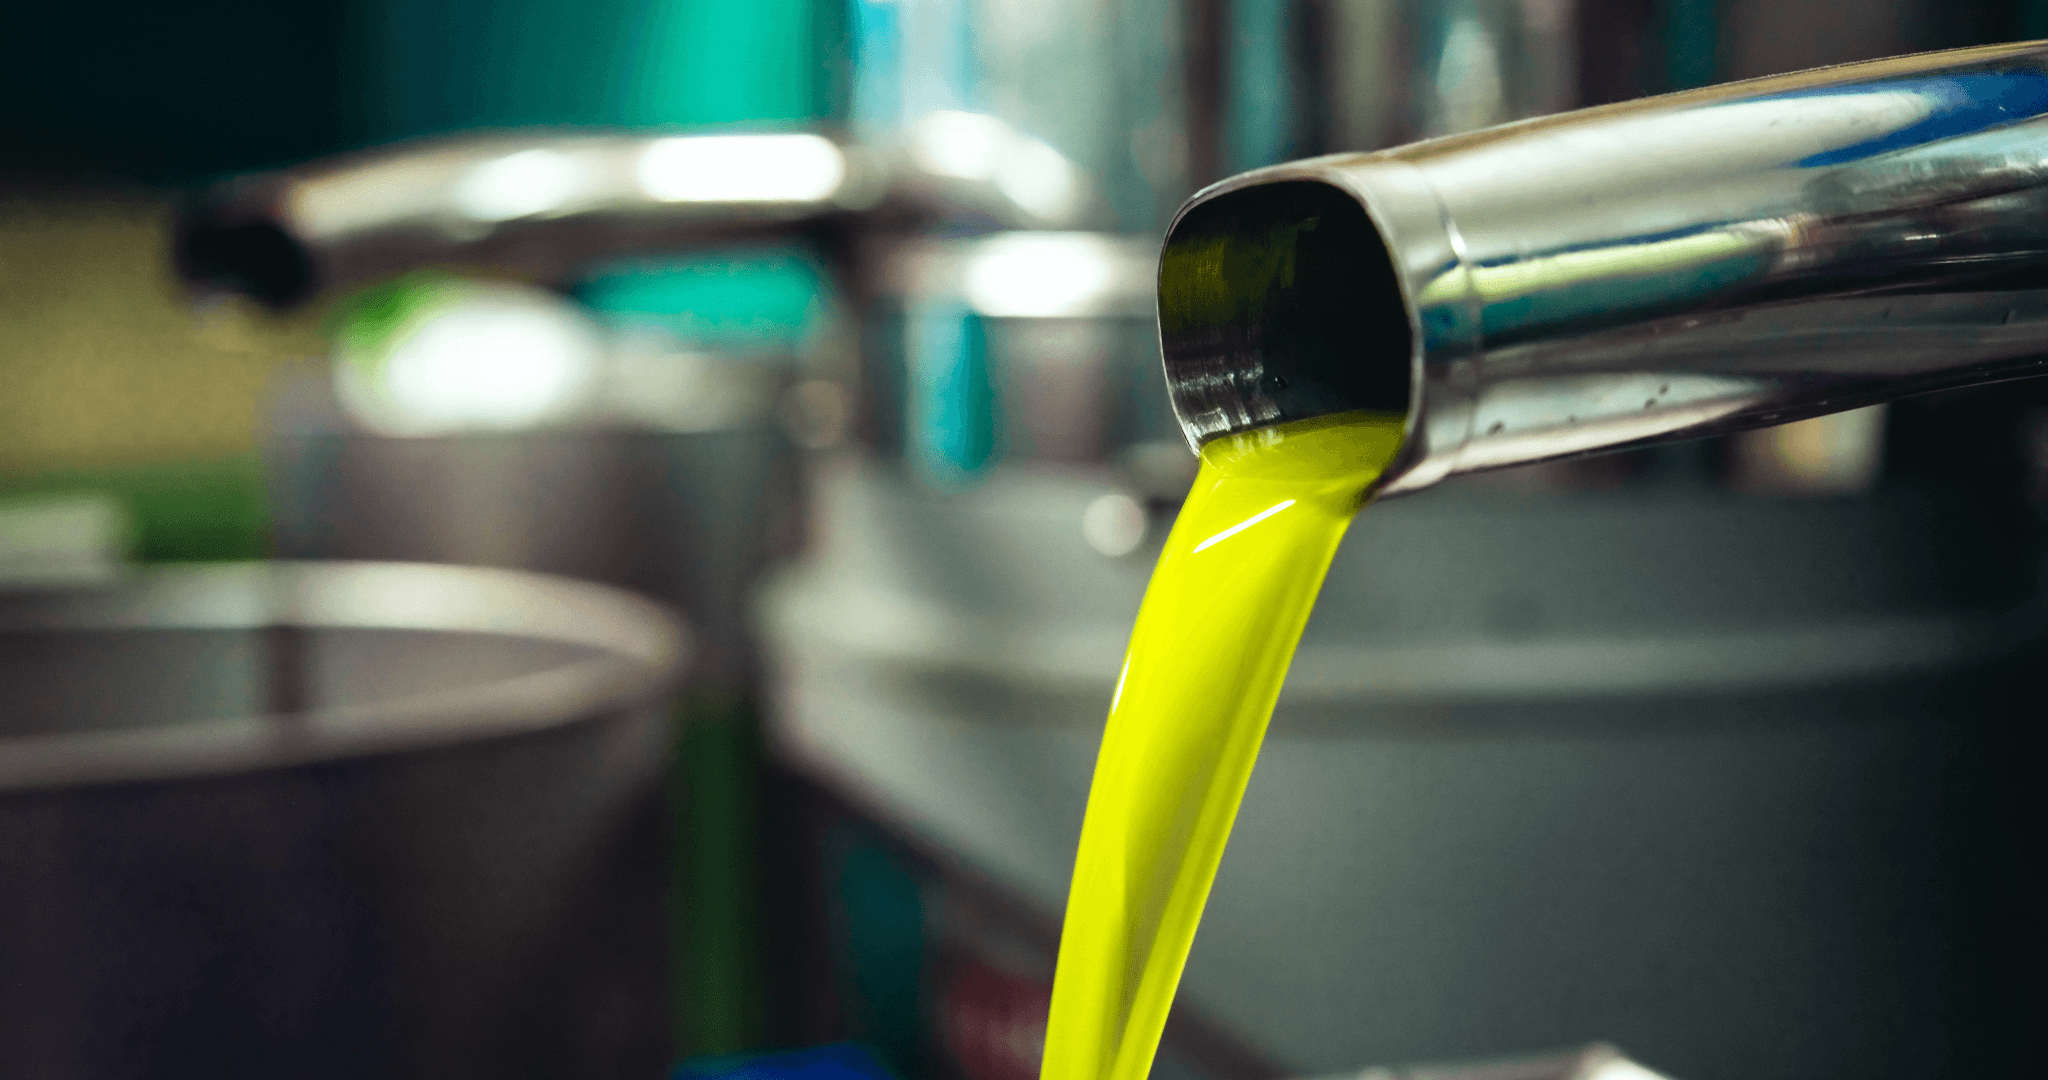 olive oil being processed